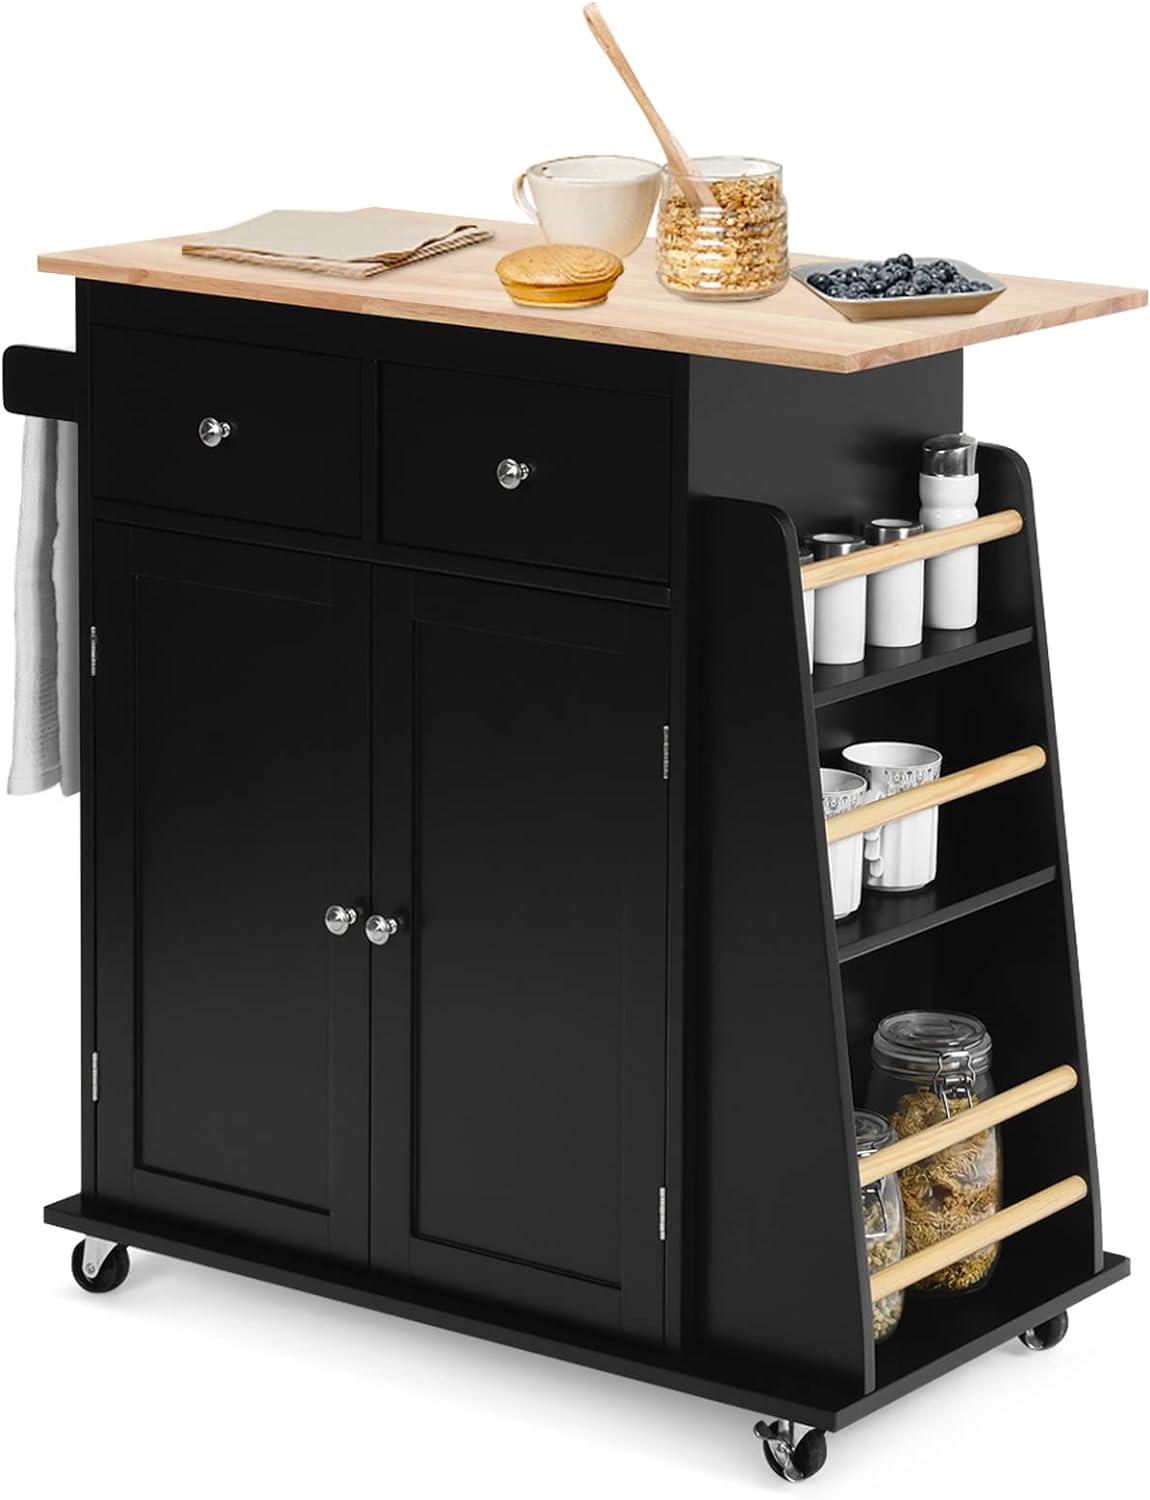 COSTWAY Kitchen Island on Wheels, Utility Trolley Cart with Adjustable Shelf, 2 Drawers, 3-Tier Spice Rack, Towel Rack, 2-Door Cabinet, Rubber Wood Countertop, Lockable Casters for Dining Room (Black)